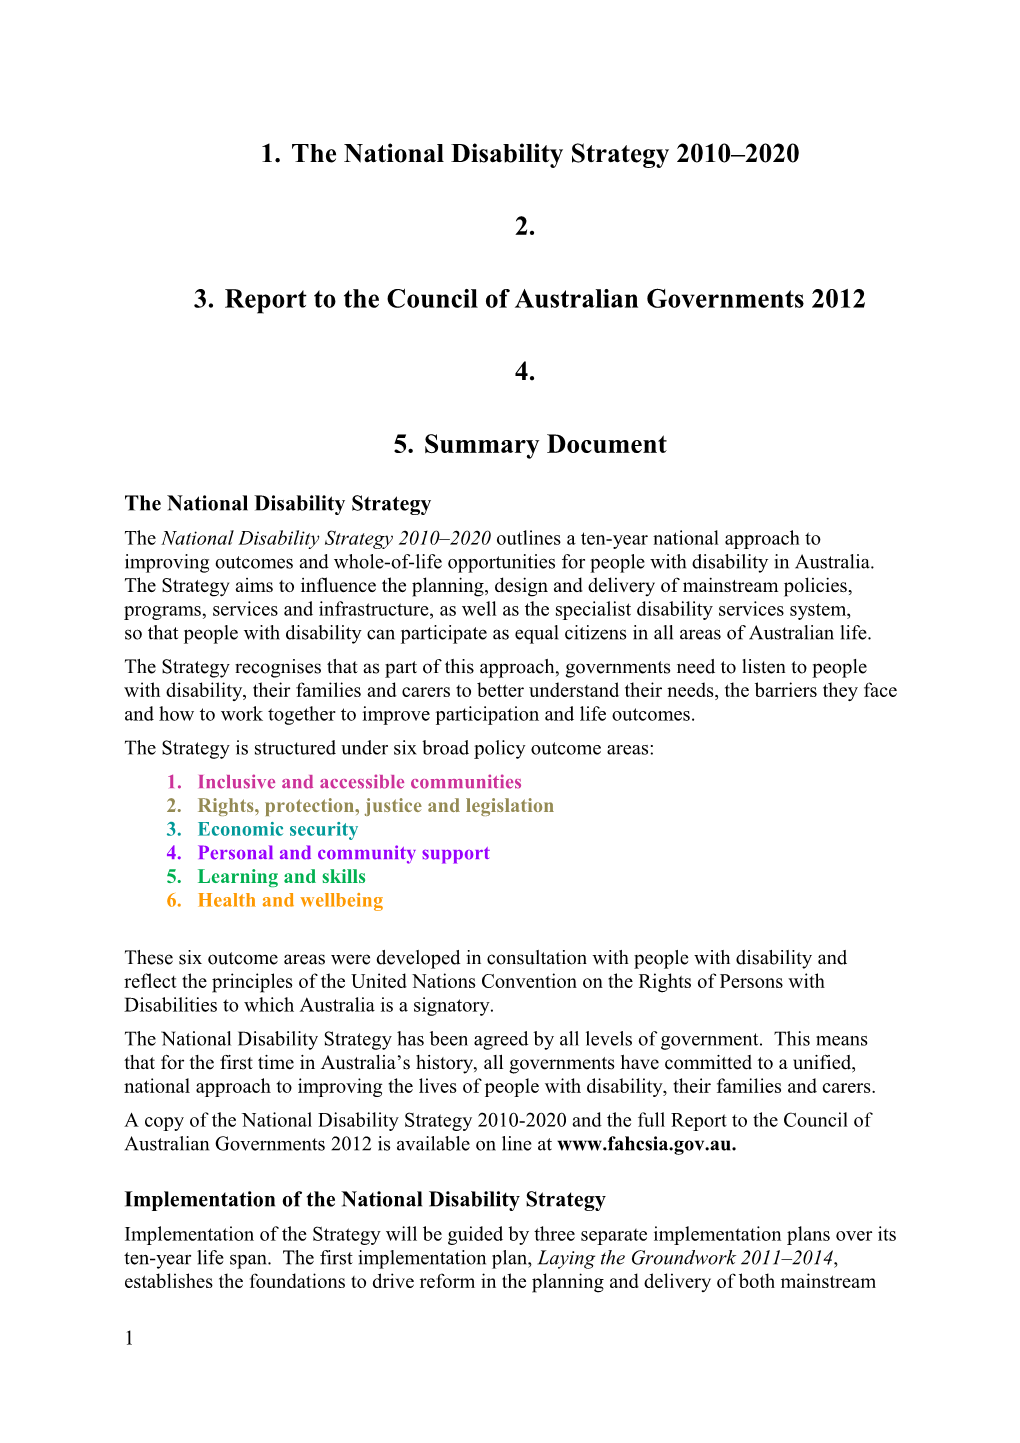 The National Disability Strategy 2010-2020 Report to COAG 2012 Summary Document